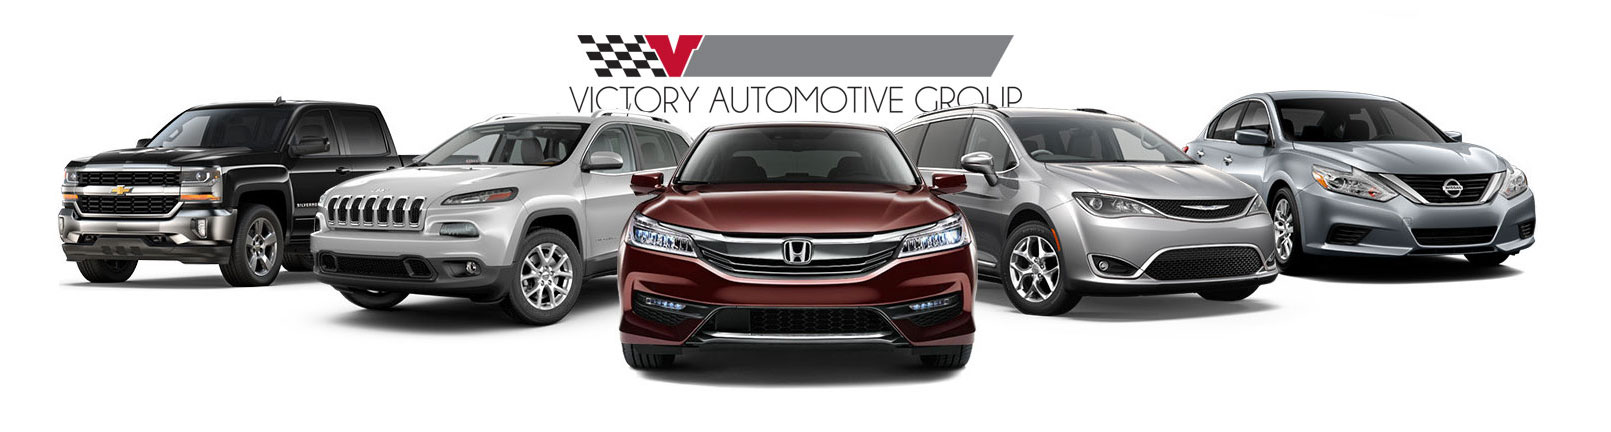 Victory Automotive Group Cars